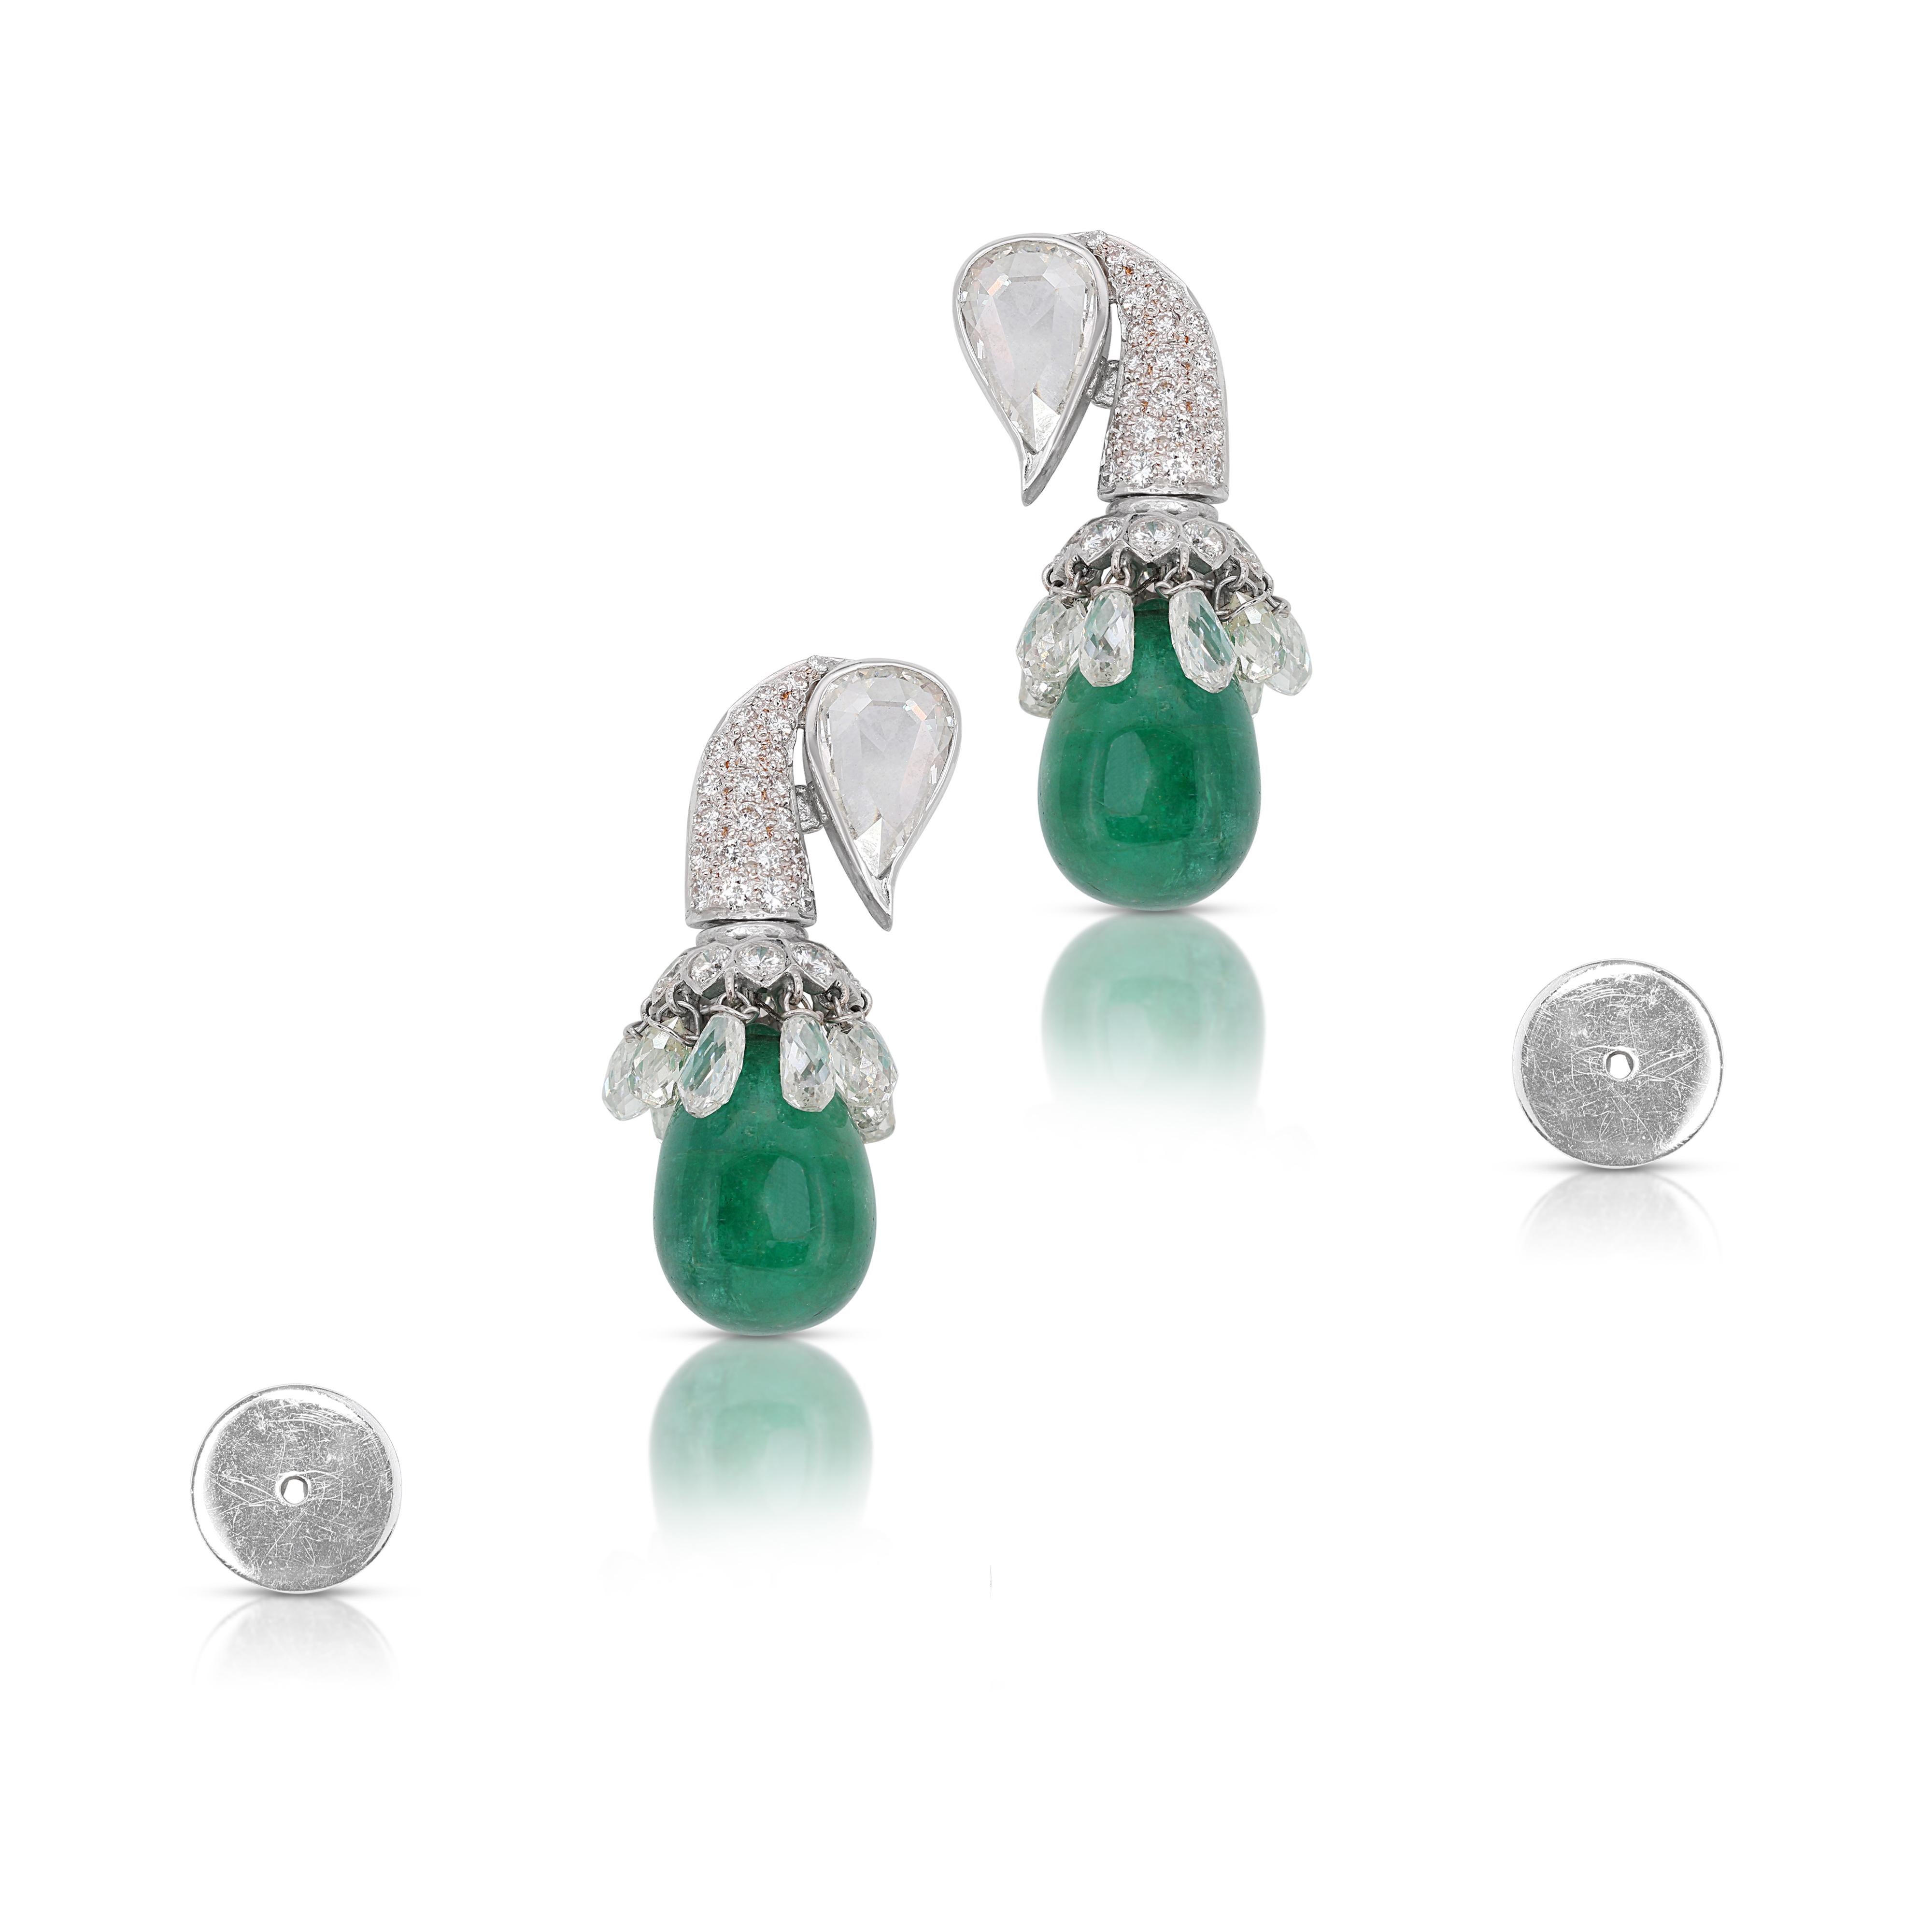 Gorgeous 24.31ct Green Emerald Teardrop Earrings with Diamonds in 18K White Gold For Sale 2